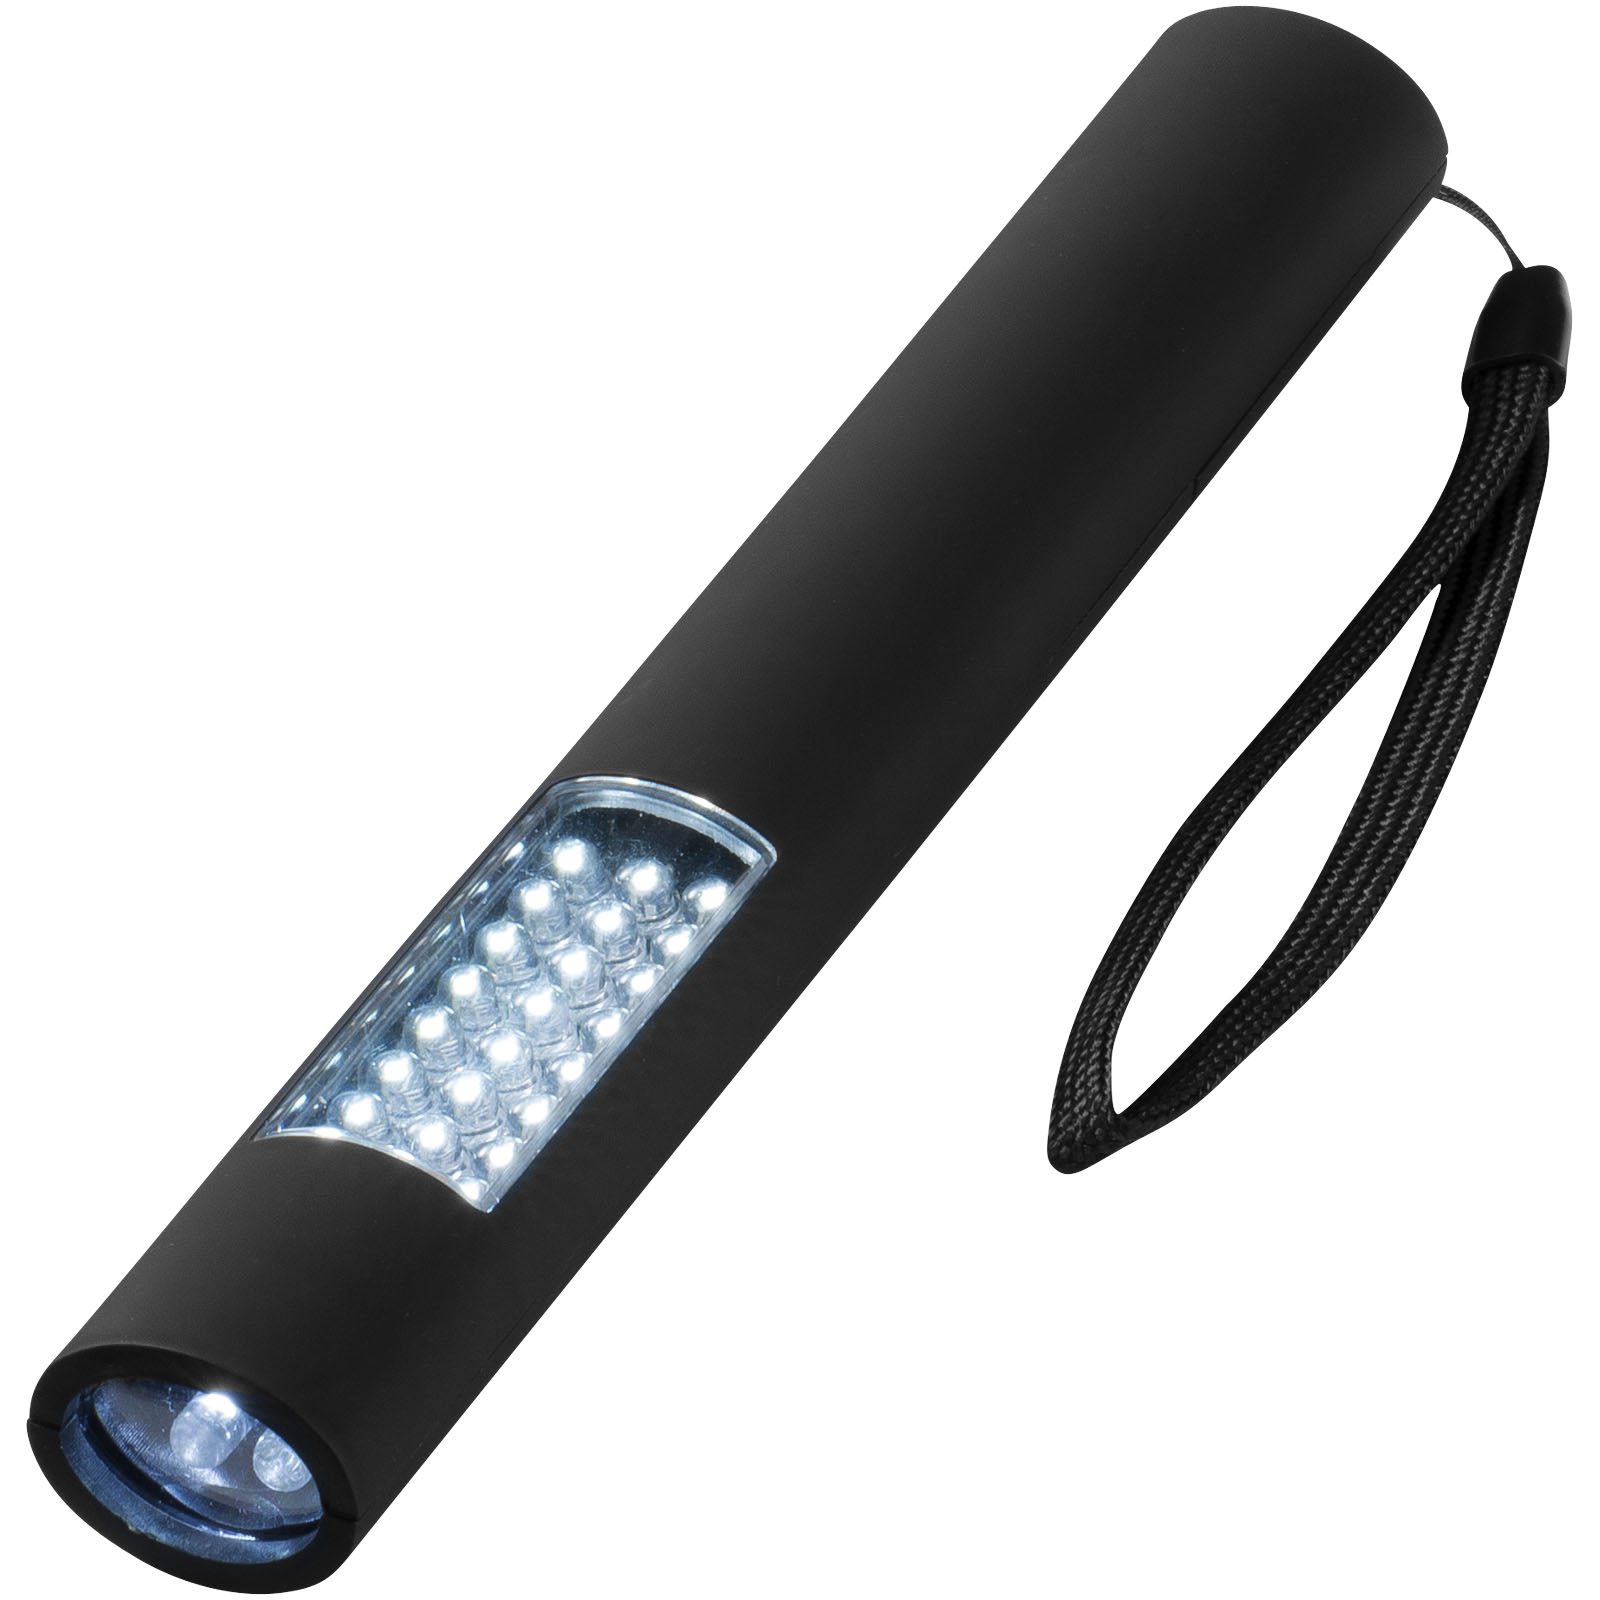 Advertising Lamps - Lutz 28-LED magnetic torch light